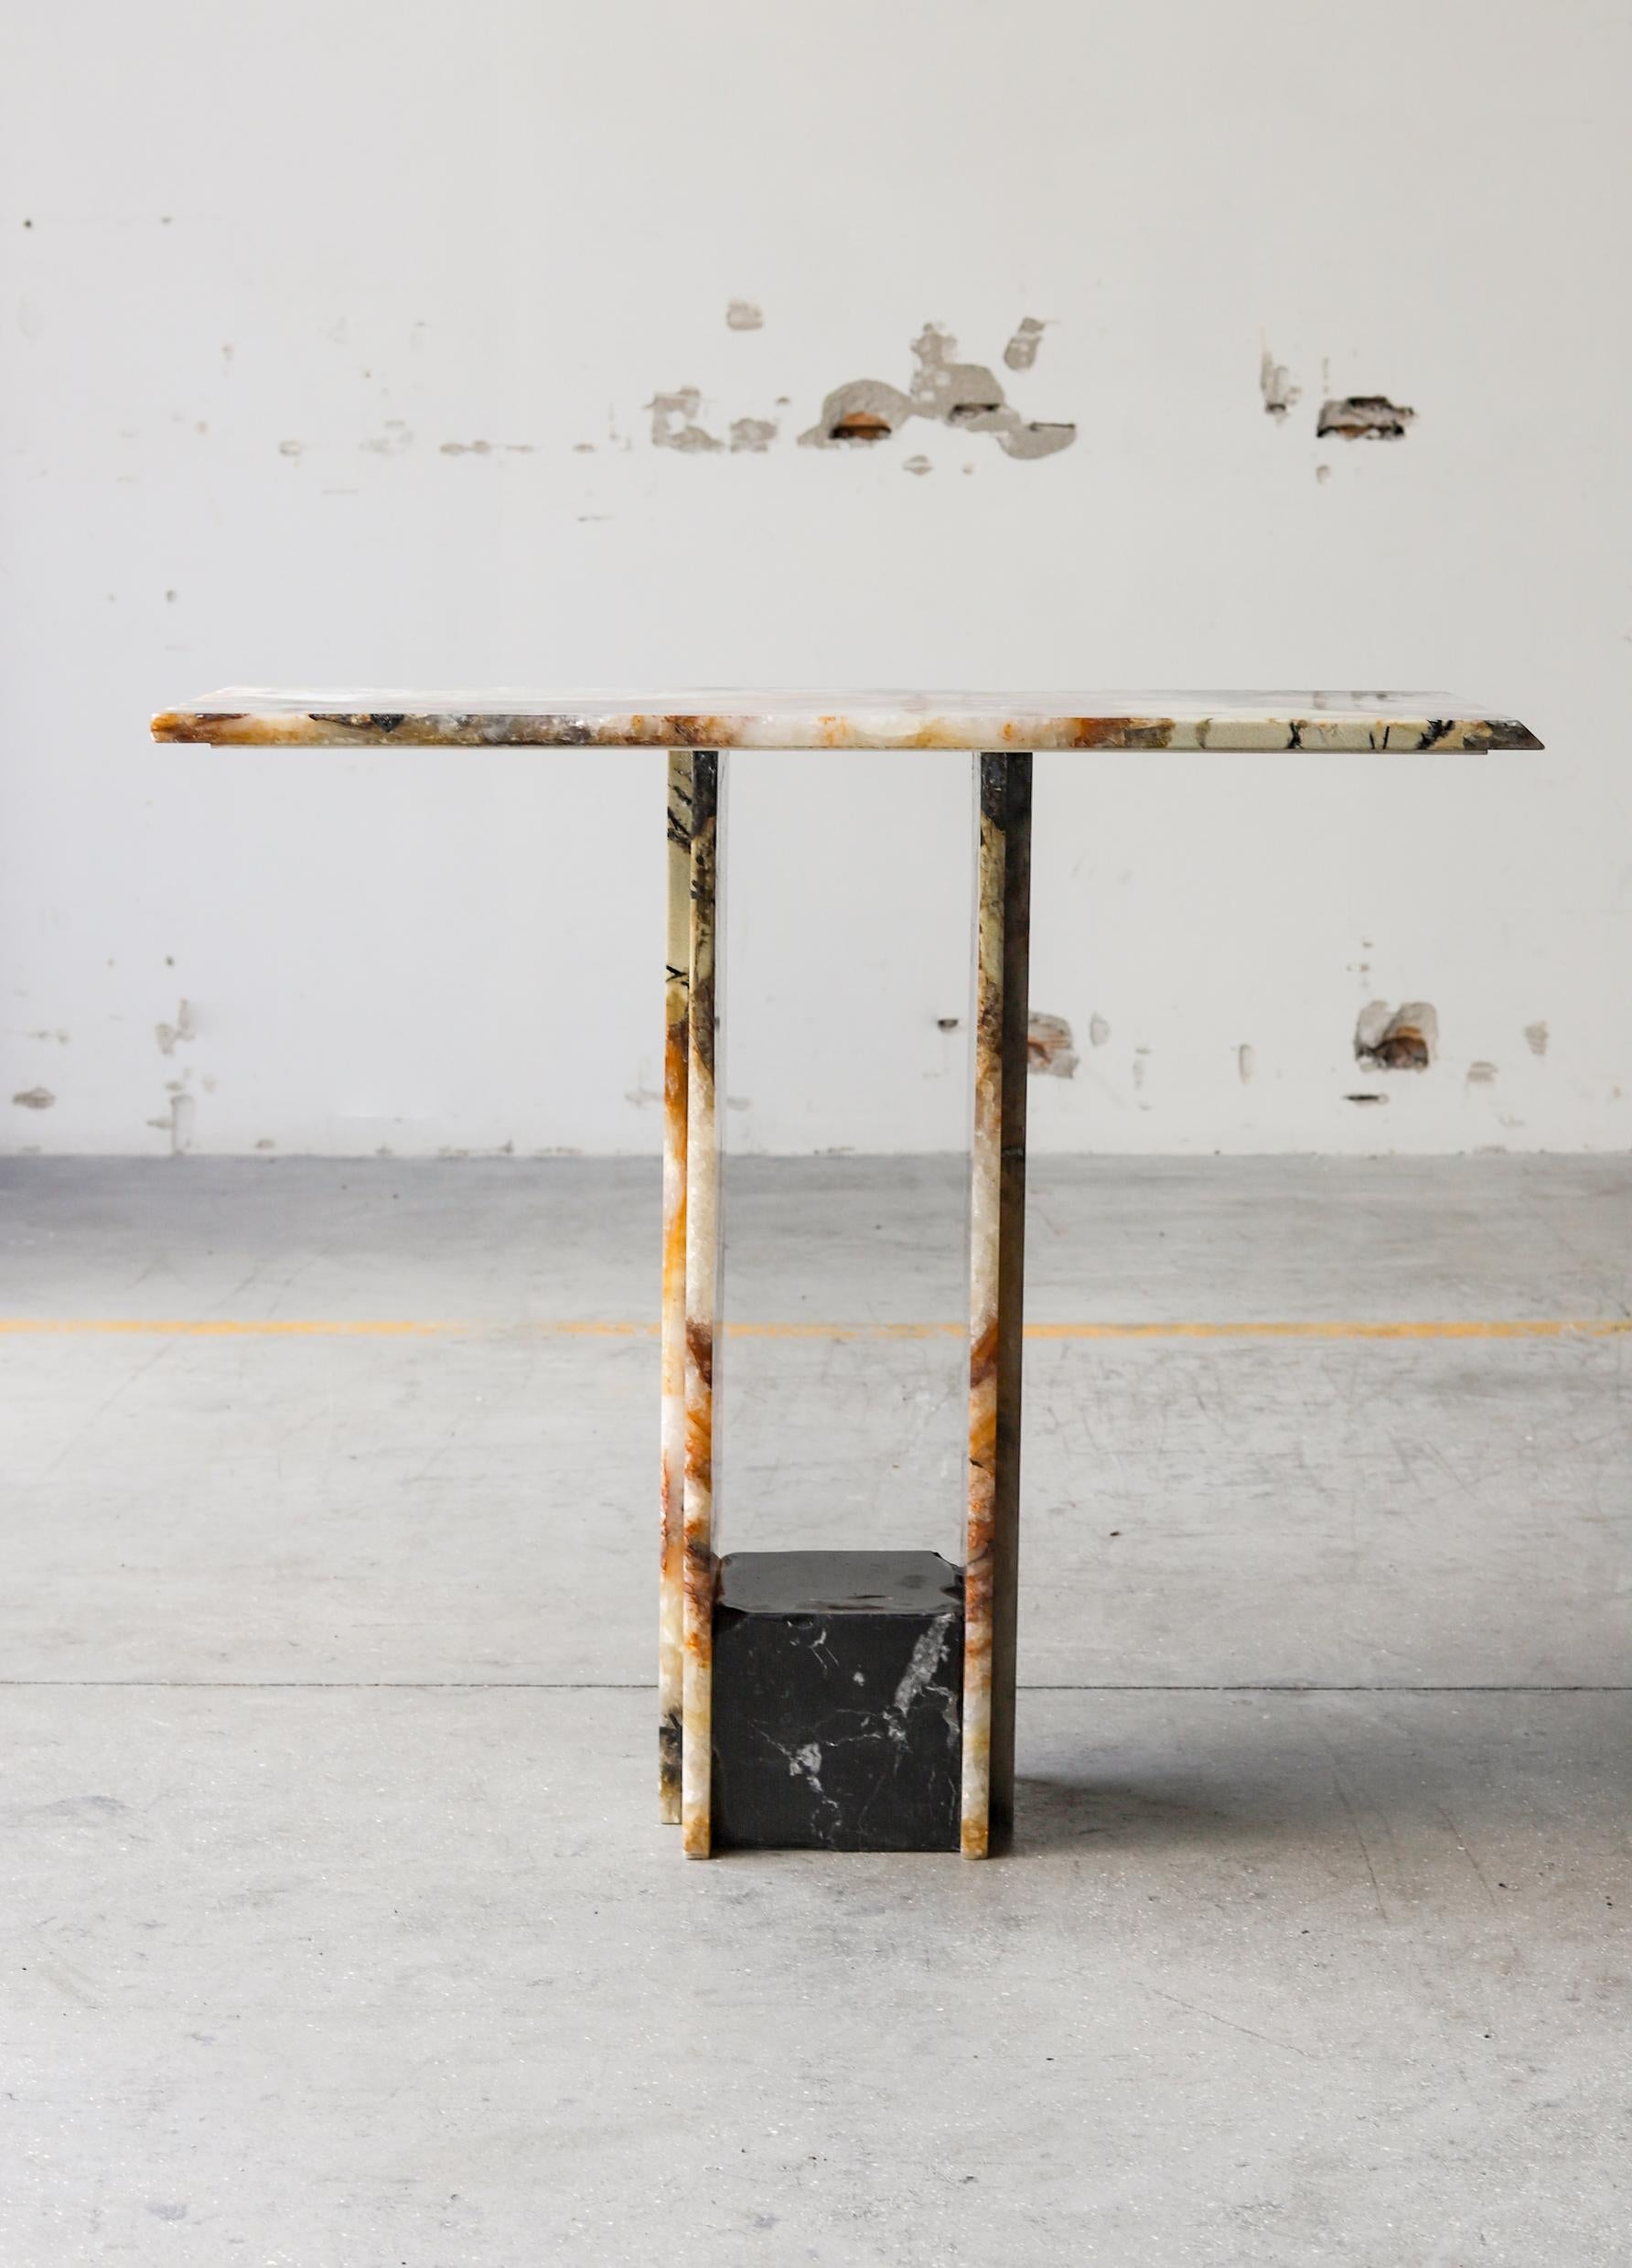 SSC103-1 console table by Stone Stackers
Limited edition of 5 products.
Dimensions: W 92 x D 39 x H 81 cm.
Materials: Patagonia and Marquina marbles.
Marble Structure: Patagonia
Marble Base: Marquina
Weight: 53 kg

Original console with an